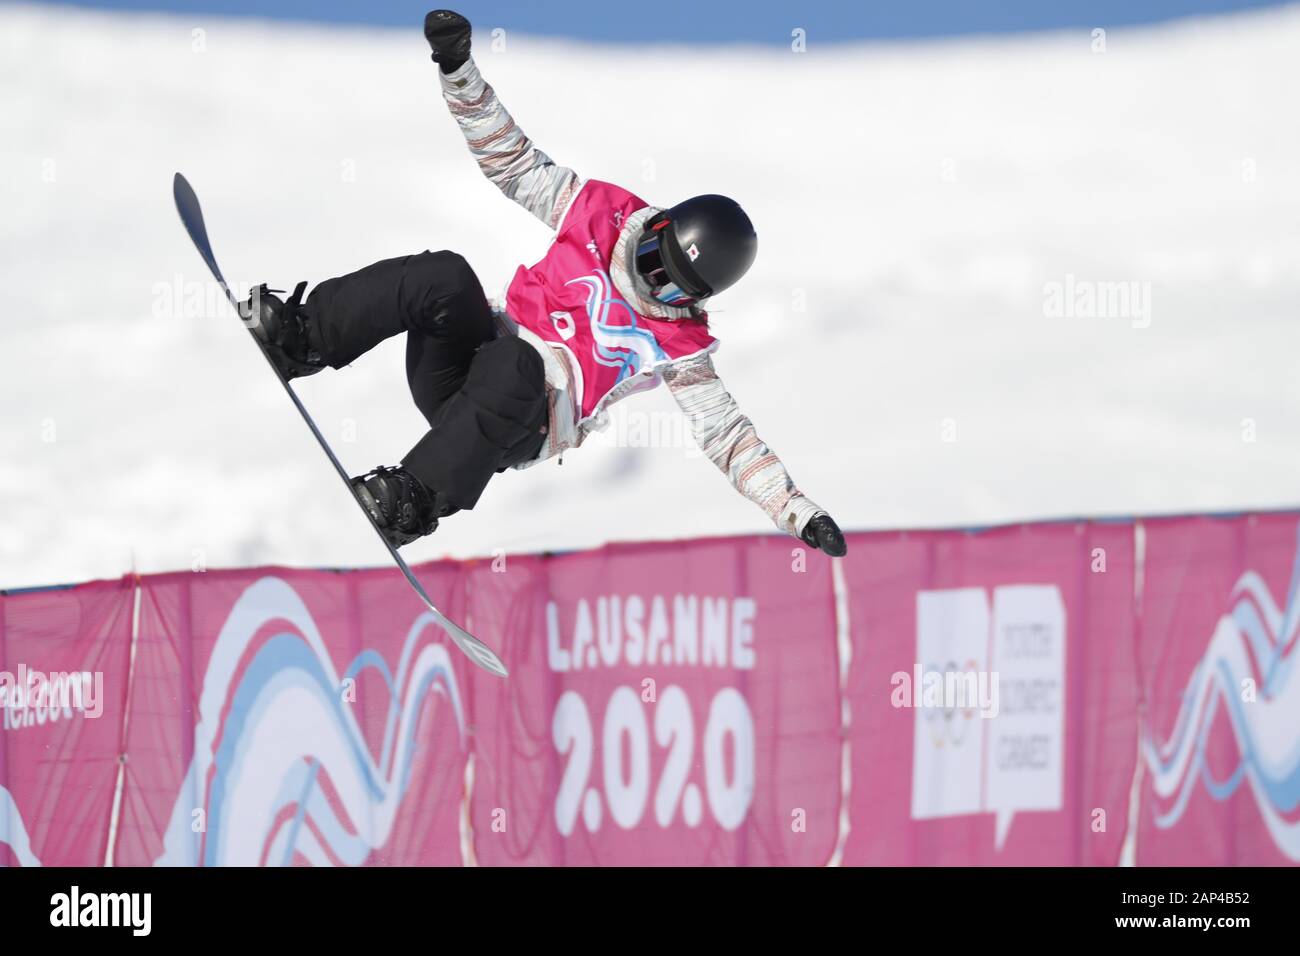 Leysin, Switzerland. 20th Jan, 2020. Japan's Manon Kaji competes during the 3rd Winter Youth Olympic Games Lausanne 2020 Snowboard Women's Halfpipe Semi-final at Leysin Park & Pipe in Leysin, Switzerland, January 20, 2020. Credit: AFLO SPORT/Alamy Live News Stock Photo